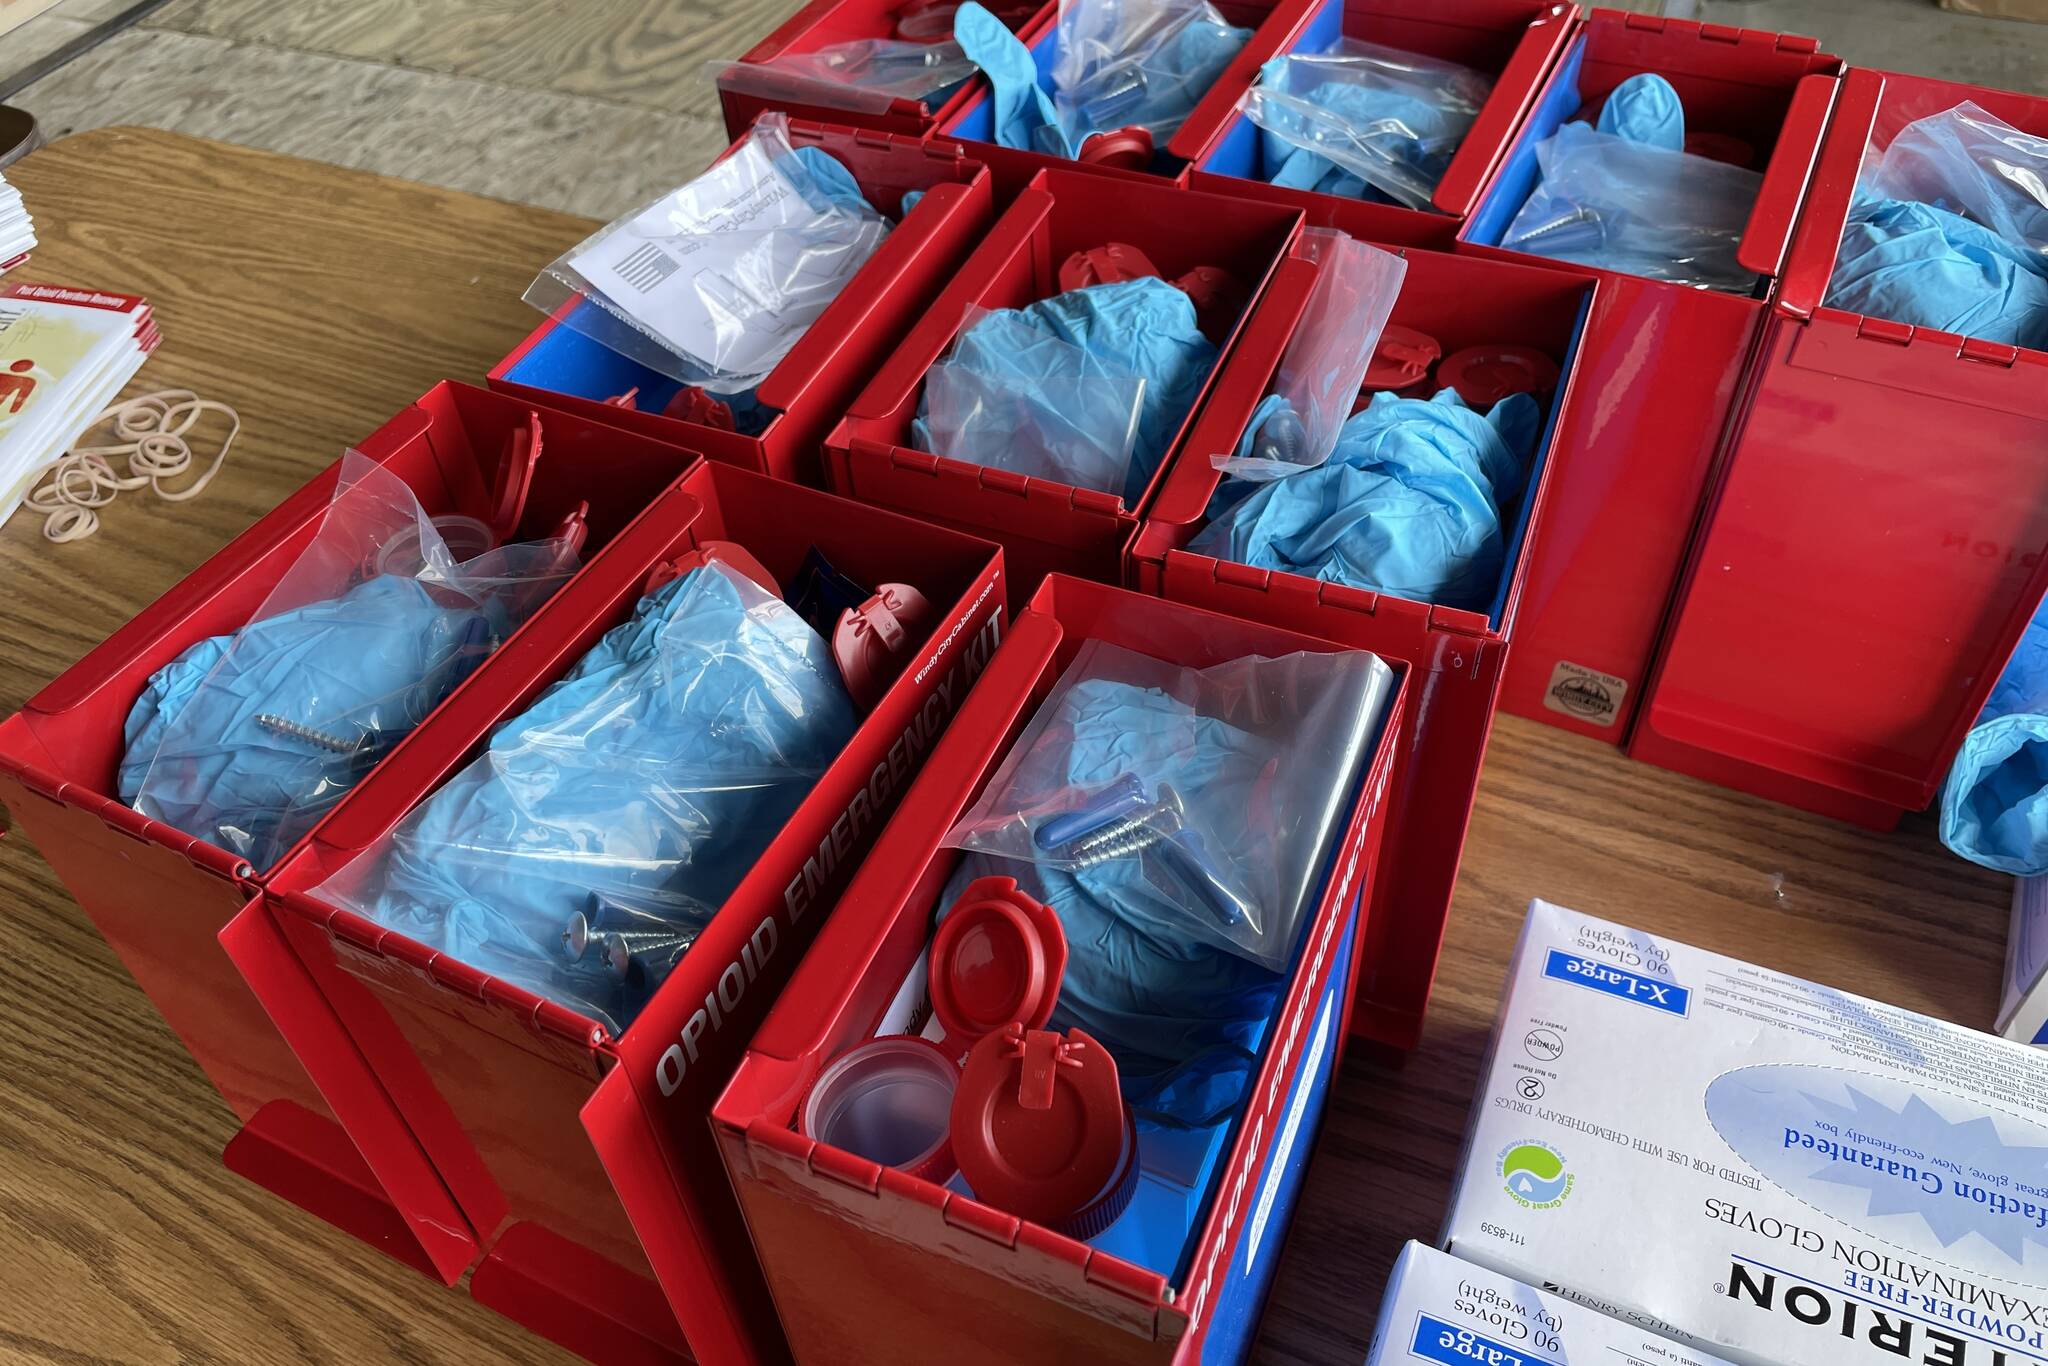 Project Gabe, named after a young man who died of an opioid overdose, aims to bring overdose kits to the fisheries industry in the Southeast. Volunteers assembled 150 kits on Friday, June 10, 2022. (Michael S. Lockett / Juneau Empire)